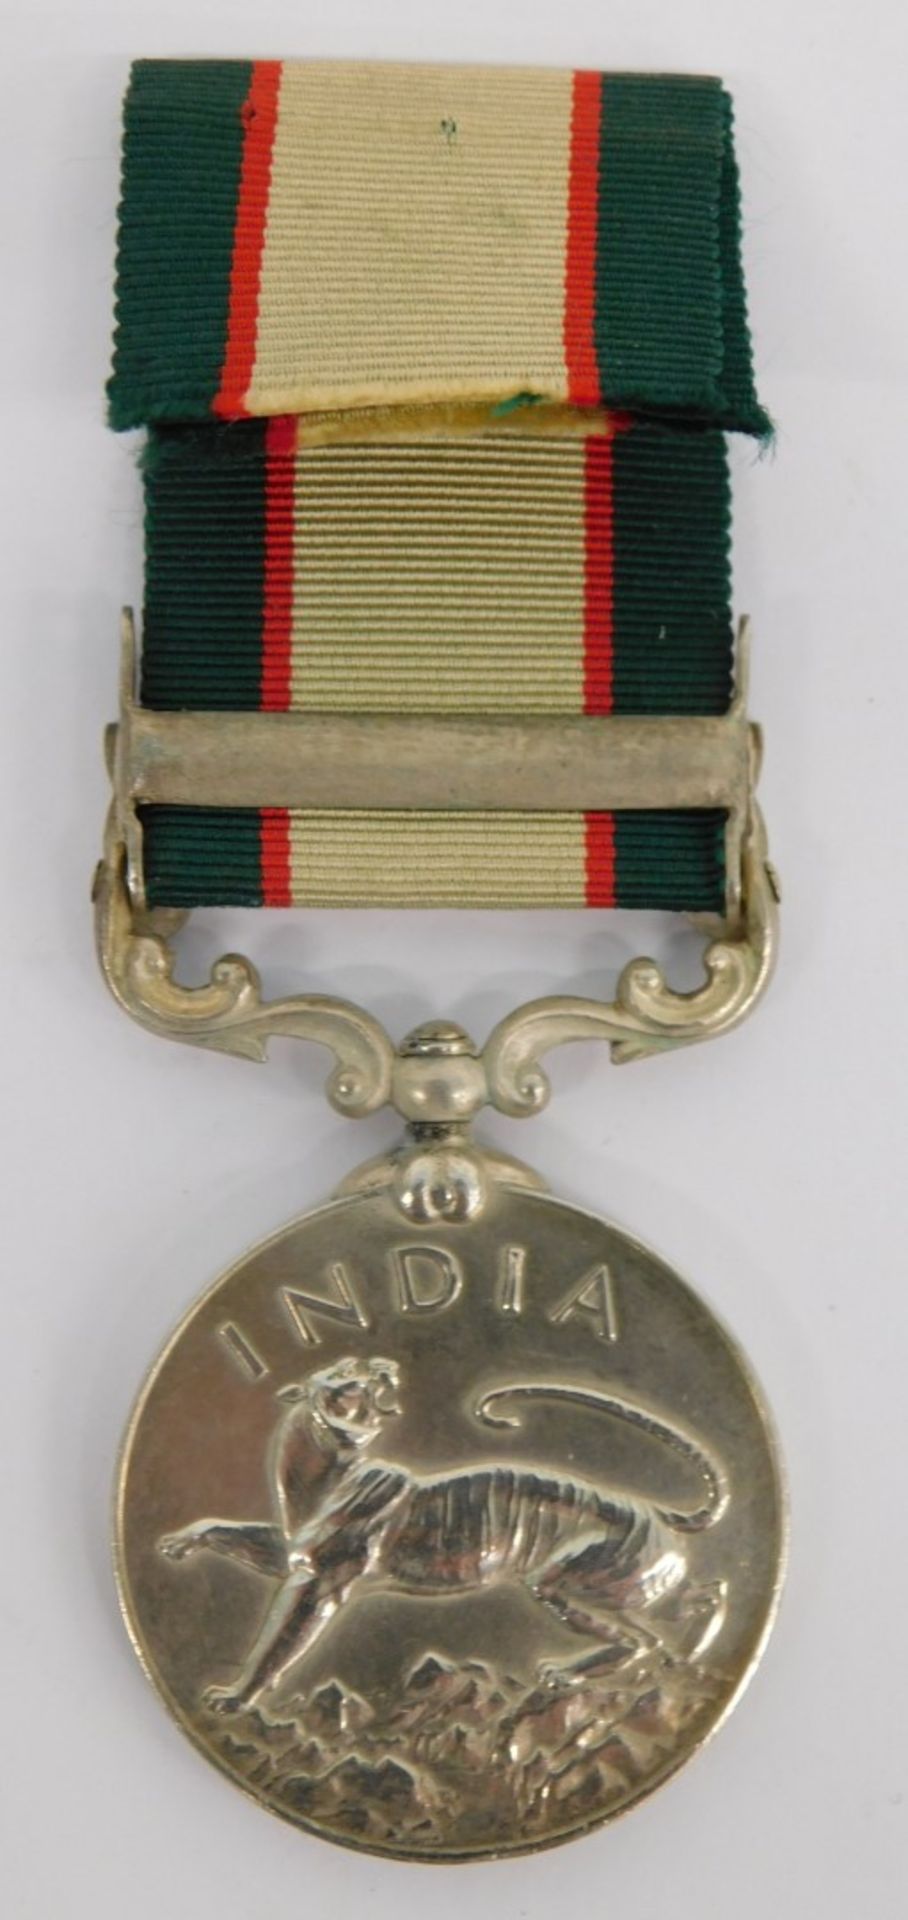 A George VI India medal, marked 14008 SEPOY MAKHMAD NUP 2-14 PUNJAB R, the ribbon with North West Fr - Image 2 of 2